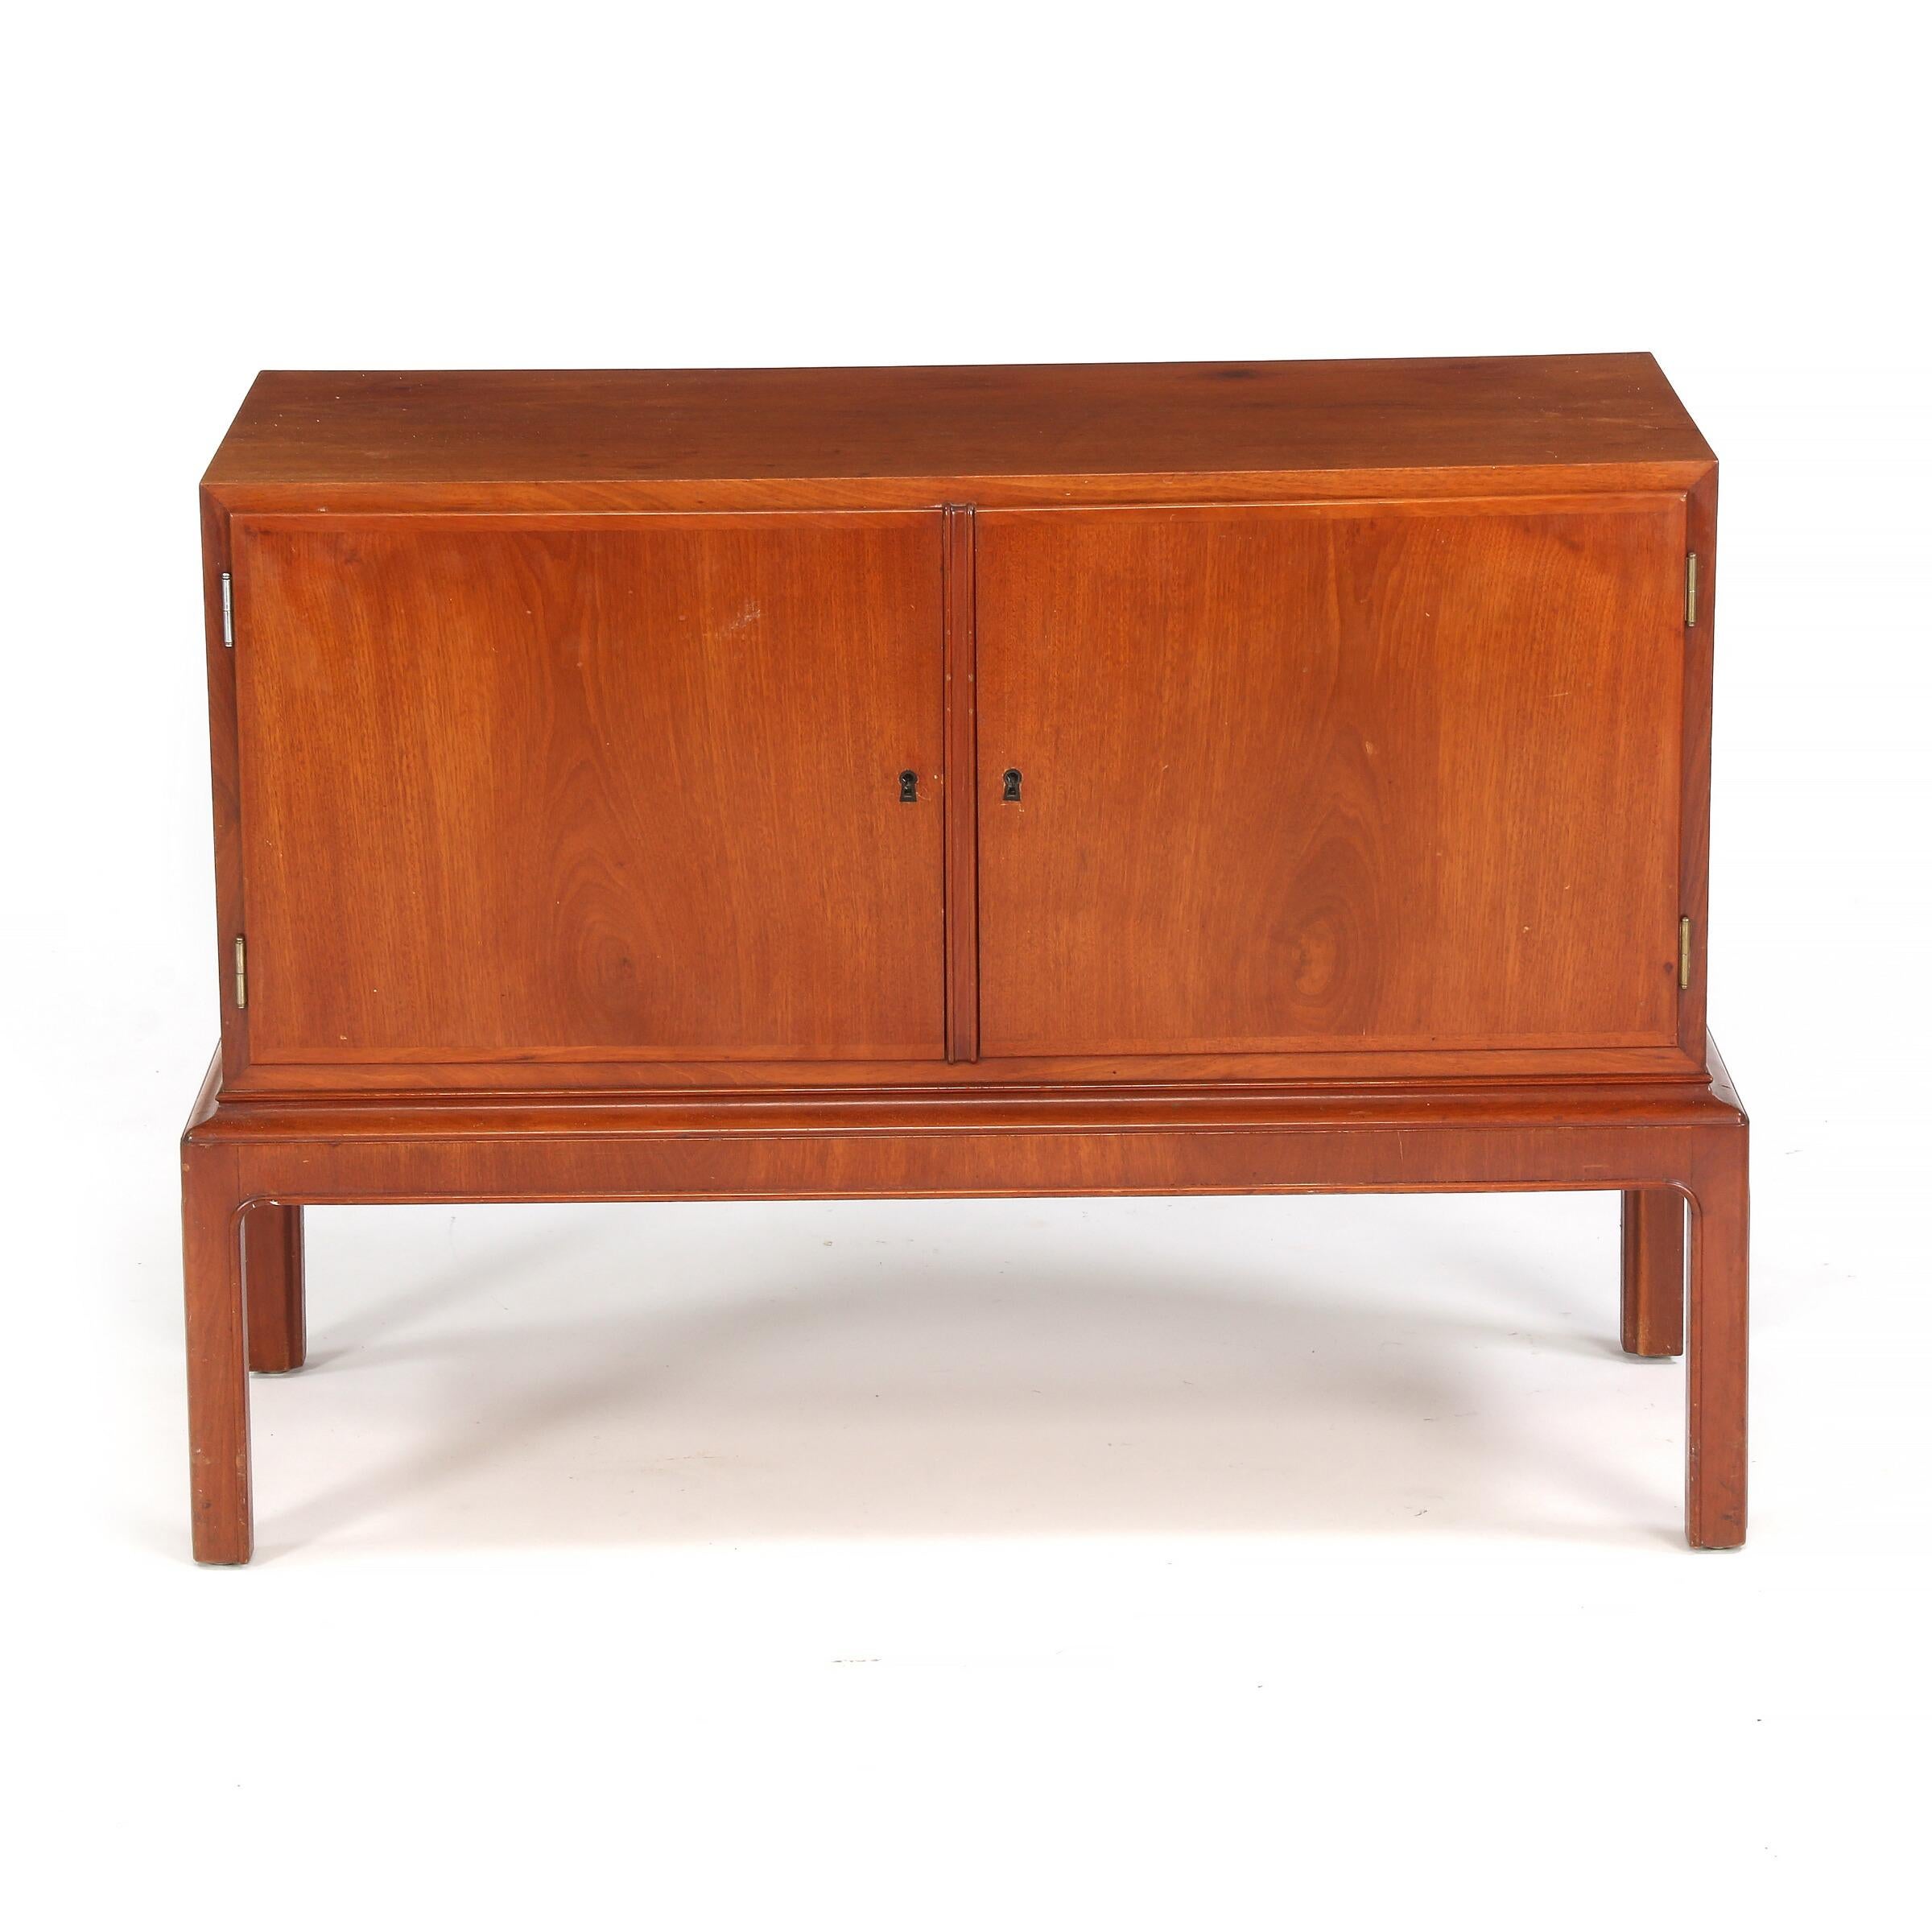 Two high quality Danish modern cabinetmaker sideboards, in rich medium brown mahogany, each with two doors, and shelving, one with three drawers. Measures: H. 31